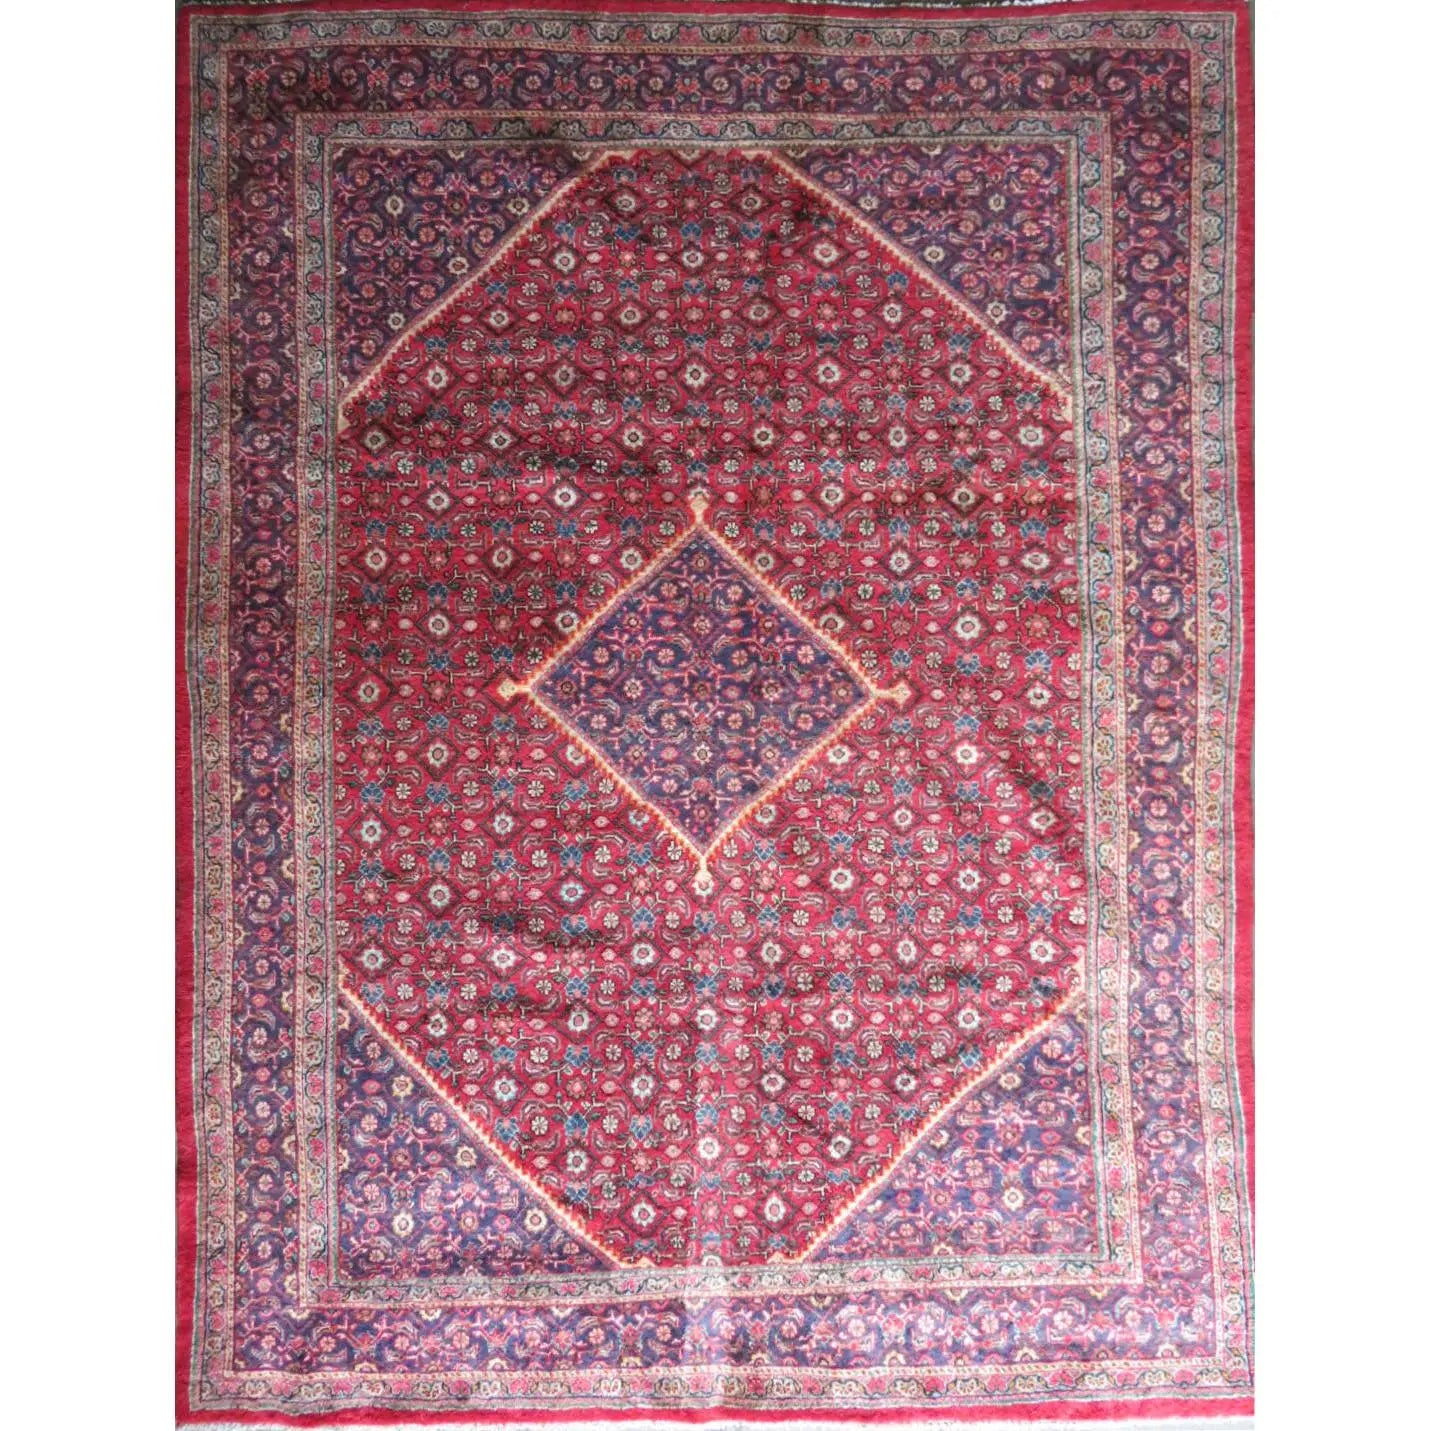 Hand-Knotted Persian Wool Rug _ Luxurious Vintage Design, 13'1" x 10'0", Artisan Crafted